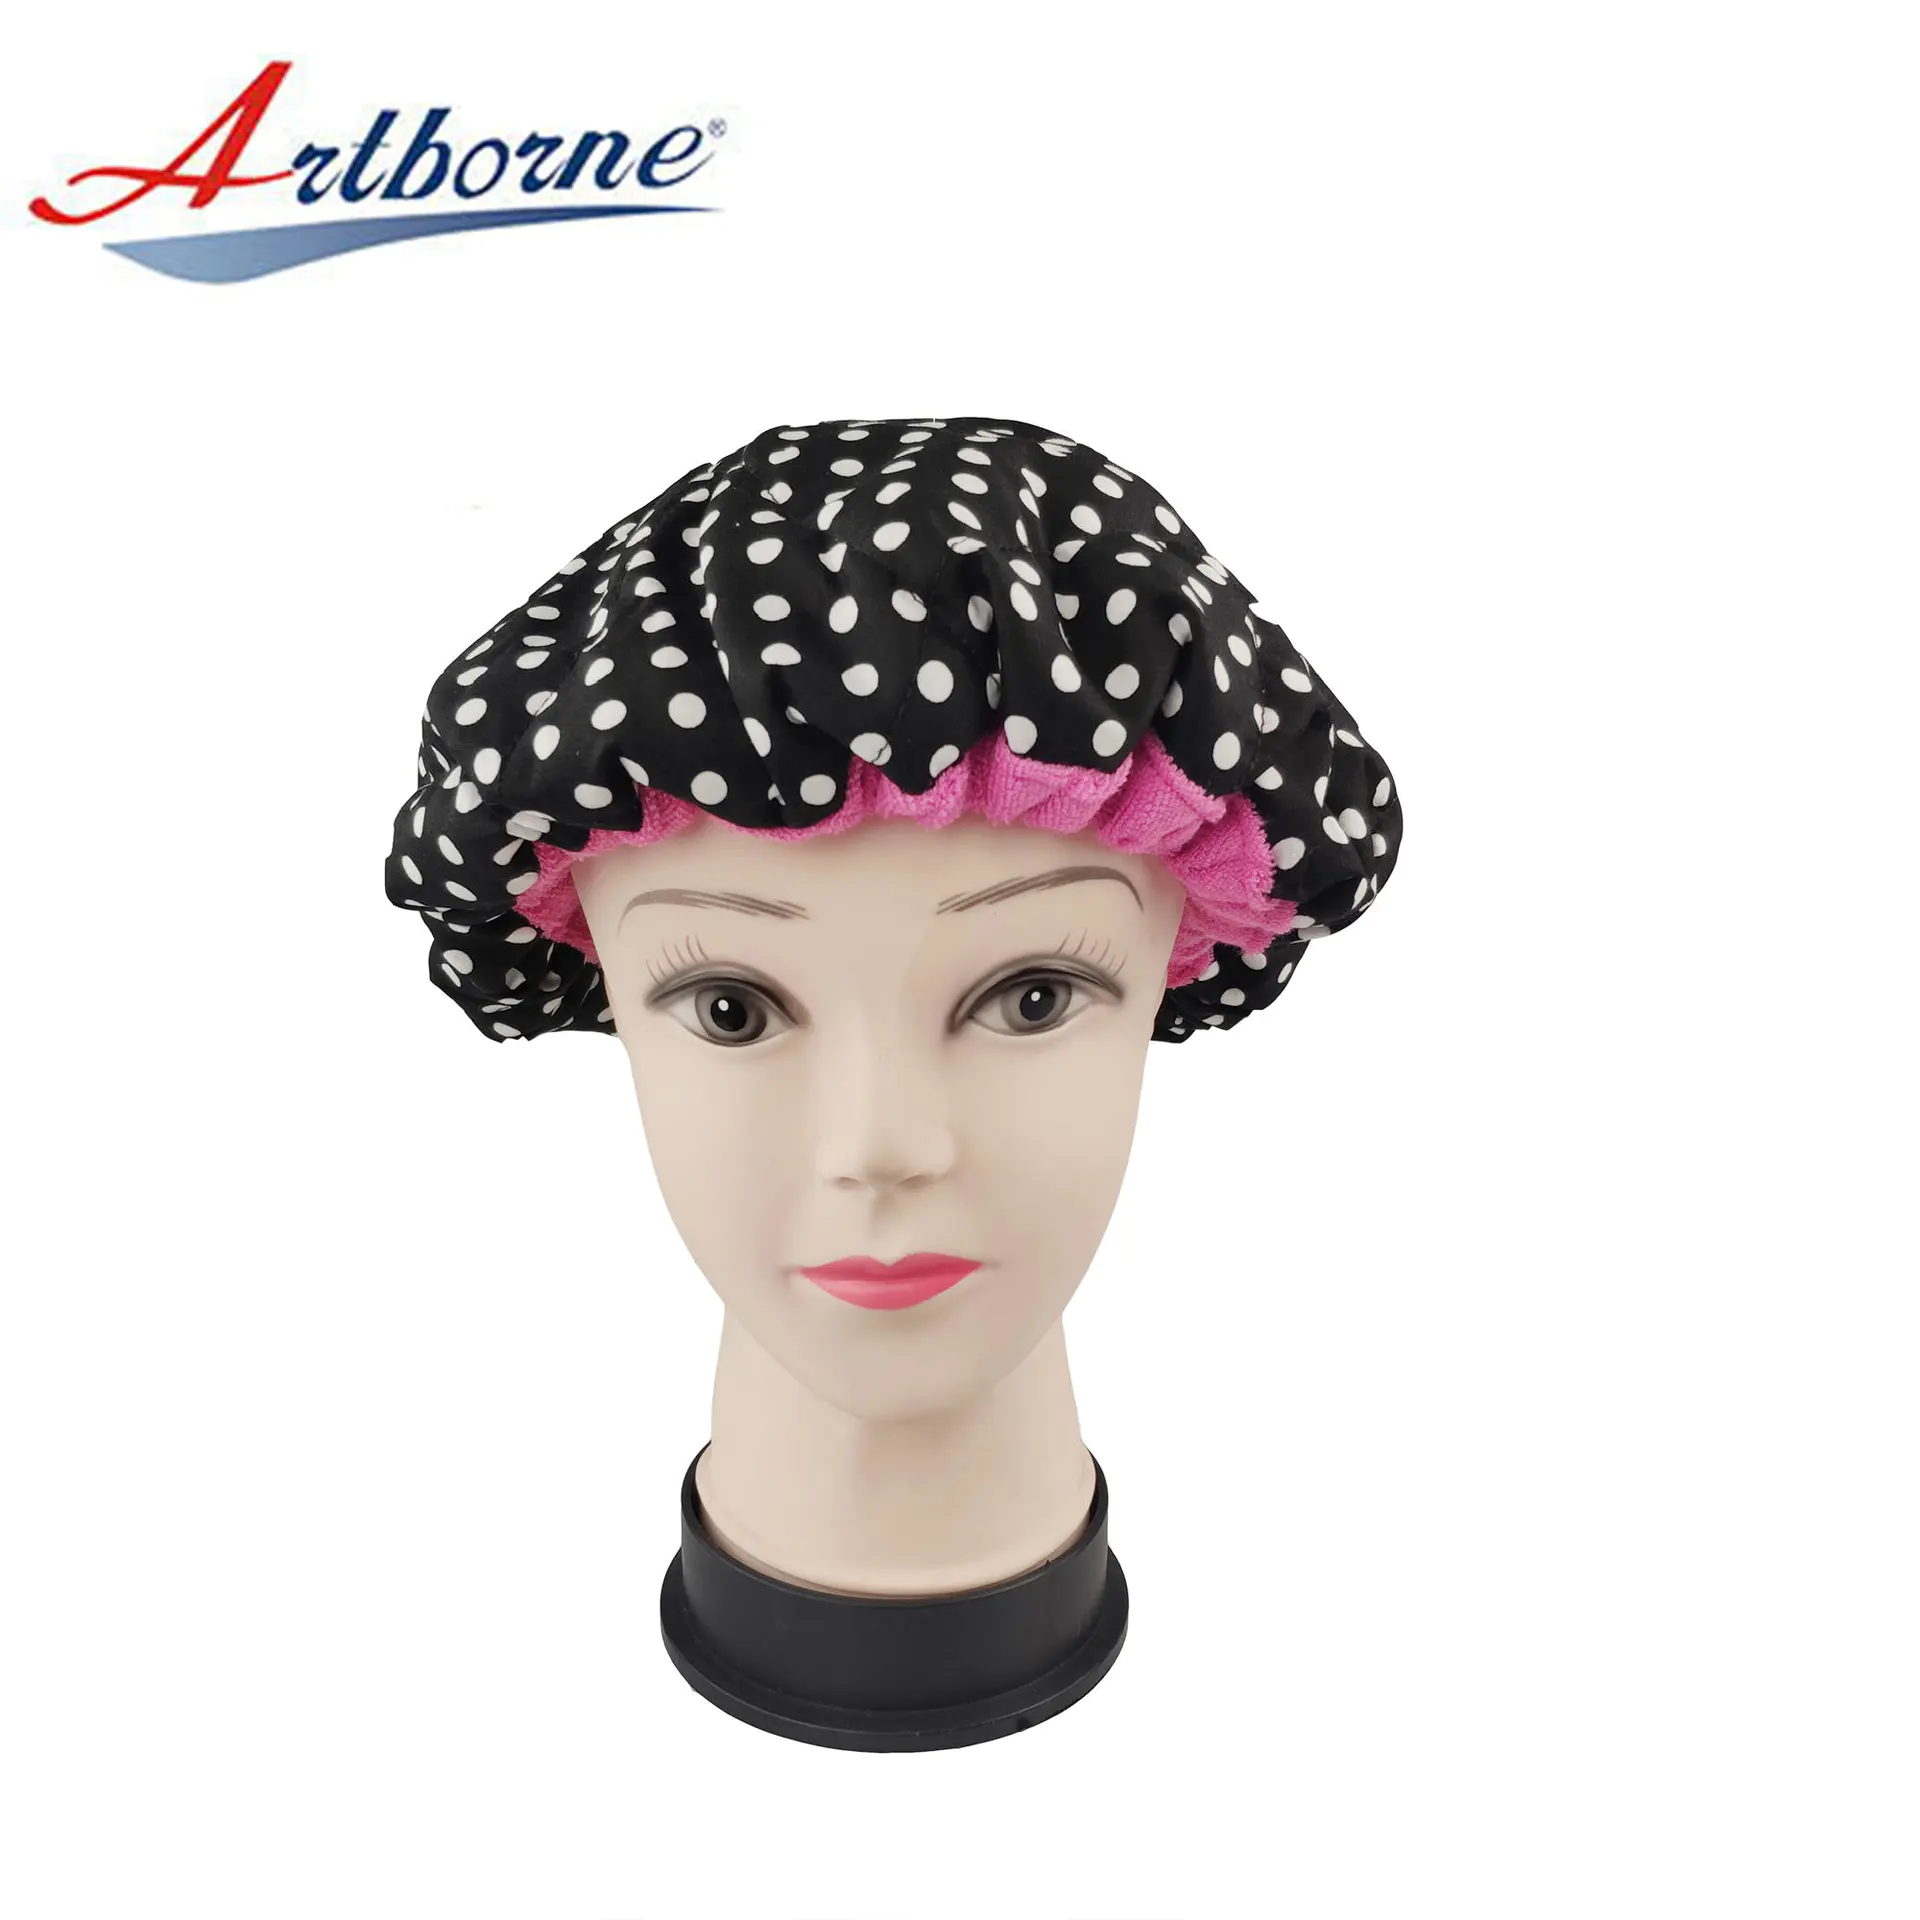 Artborne latest shower cap for women suppliers for home-32